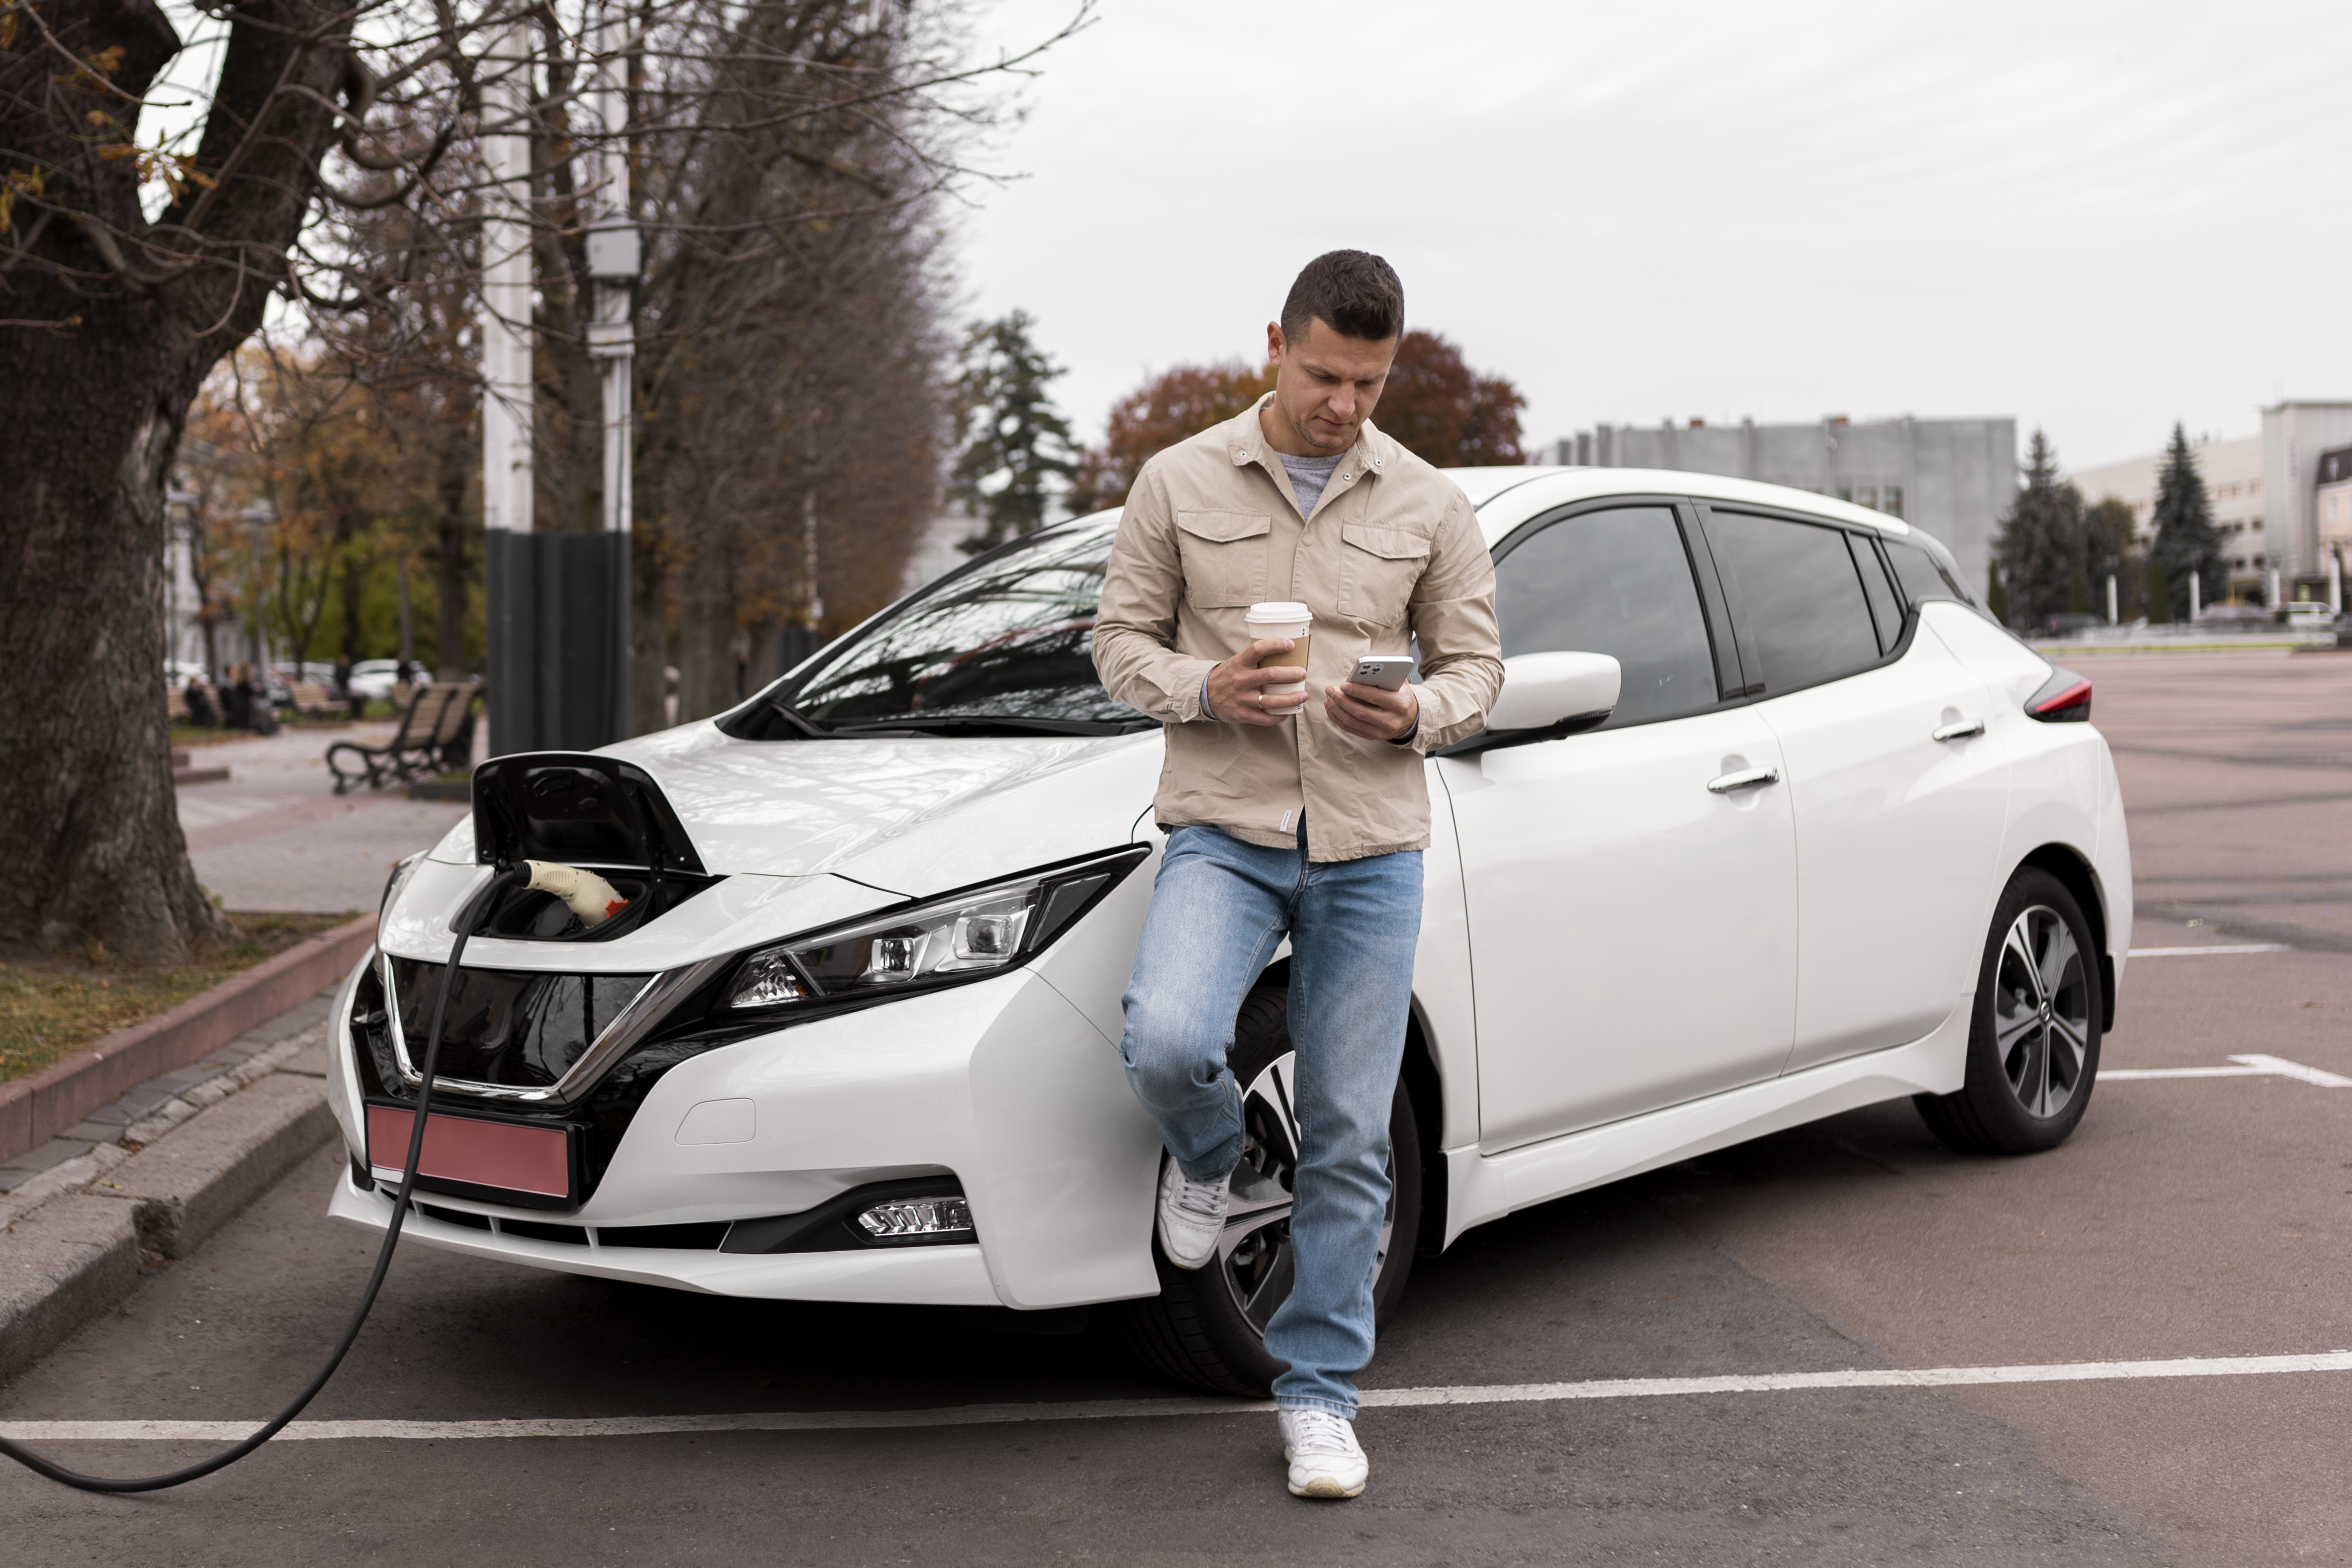 Electrical Vehicle Care and Maintenance in Calgary